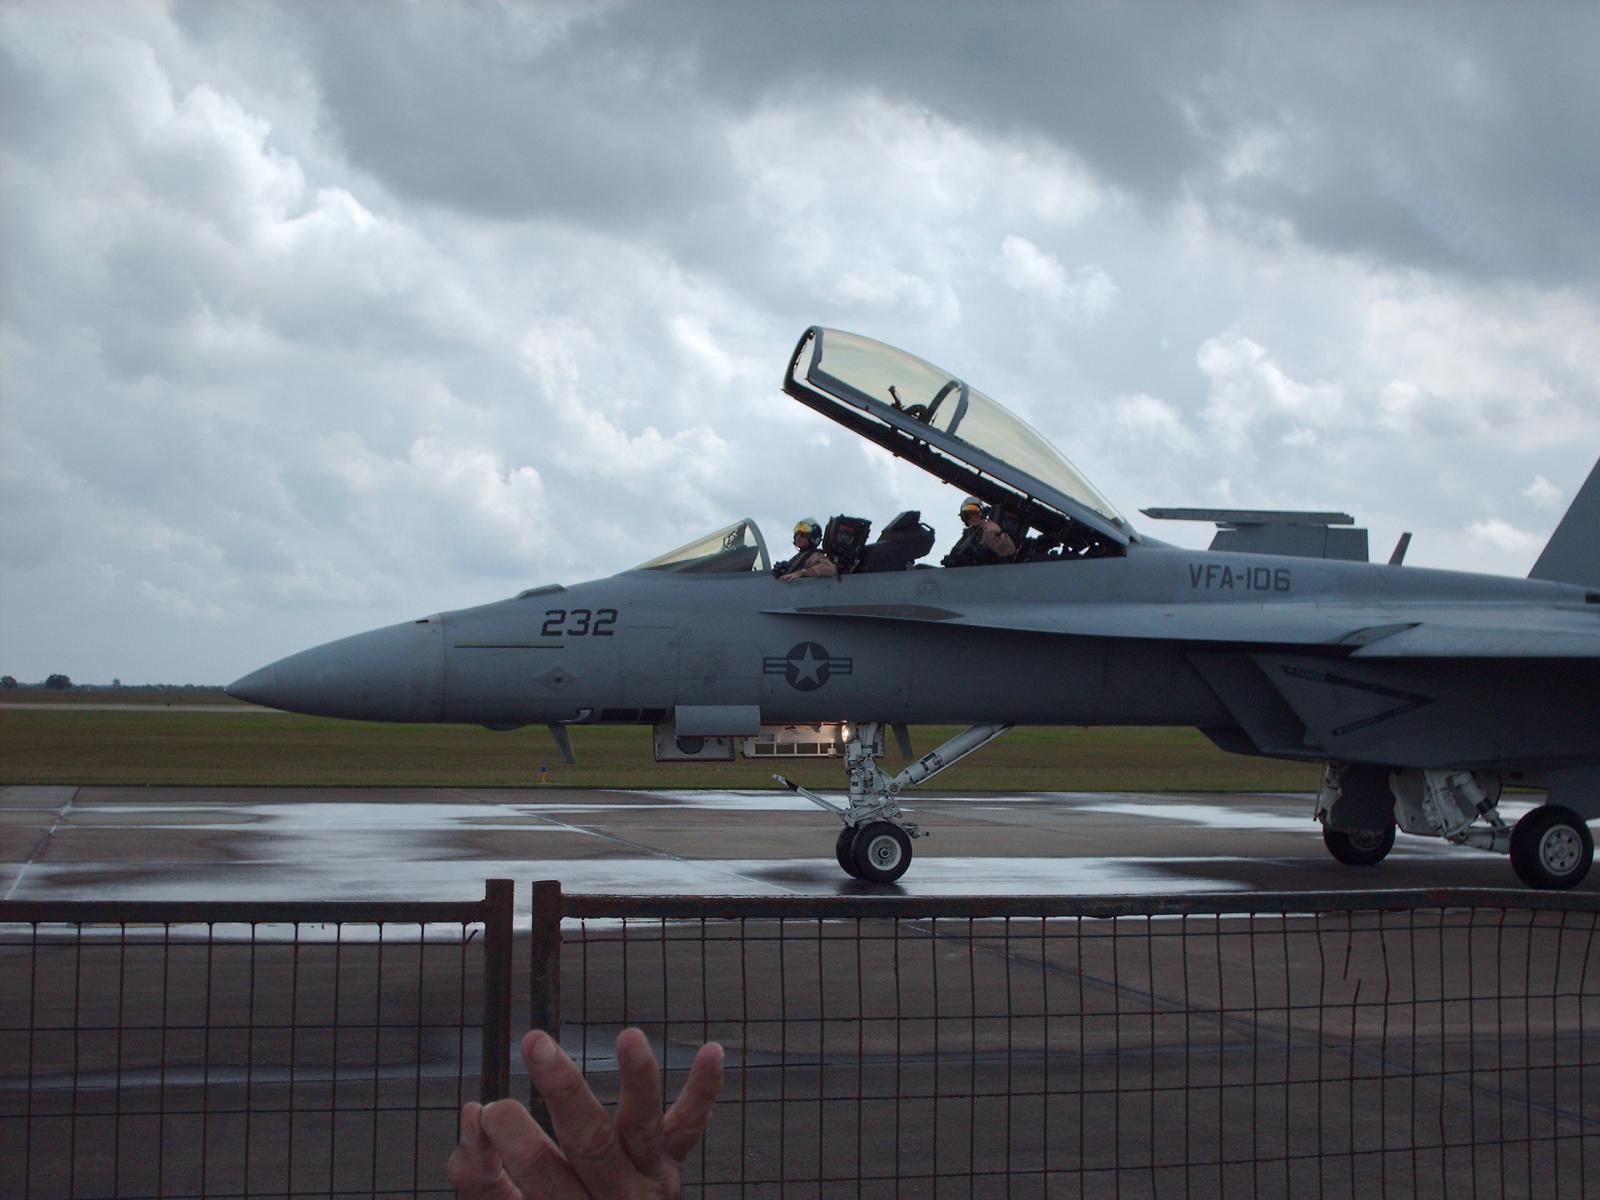 F-18 Super Hornet
Video: http://s18.photobucket.com/albums/b111/Quickster93/Wings%20over%20Houston/?action=view&current=WOH2007015.flv